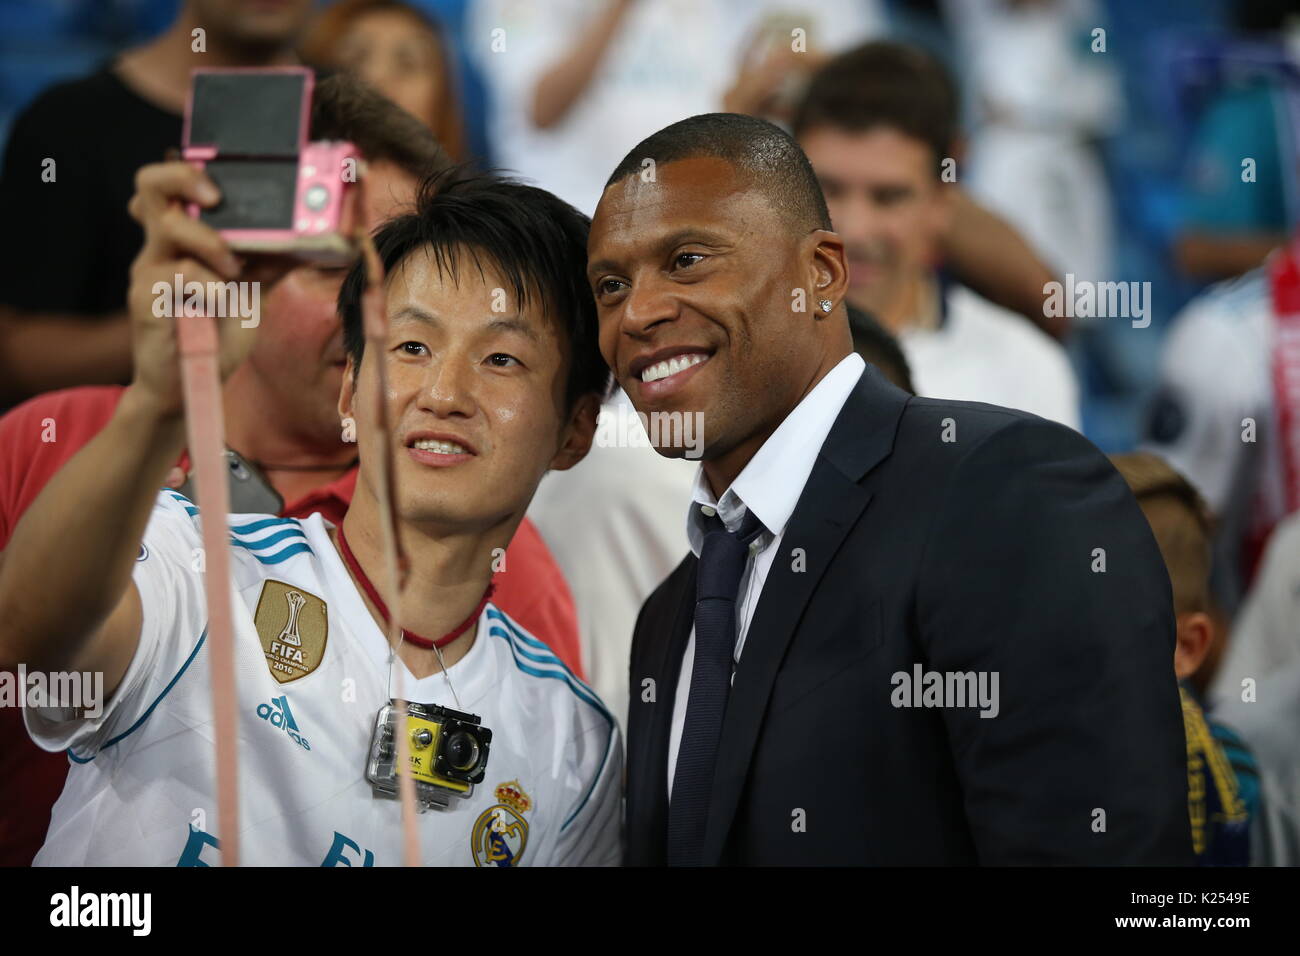 Former Real Madrid player Julio Baptista with a fan. Real Madrid defeated Barcelona 2-0 in the second leg of the Spanish Supercup football match at th Stock Photo